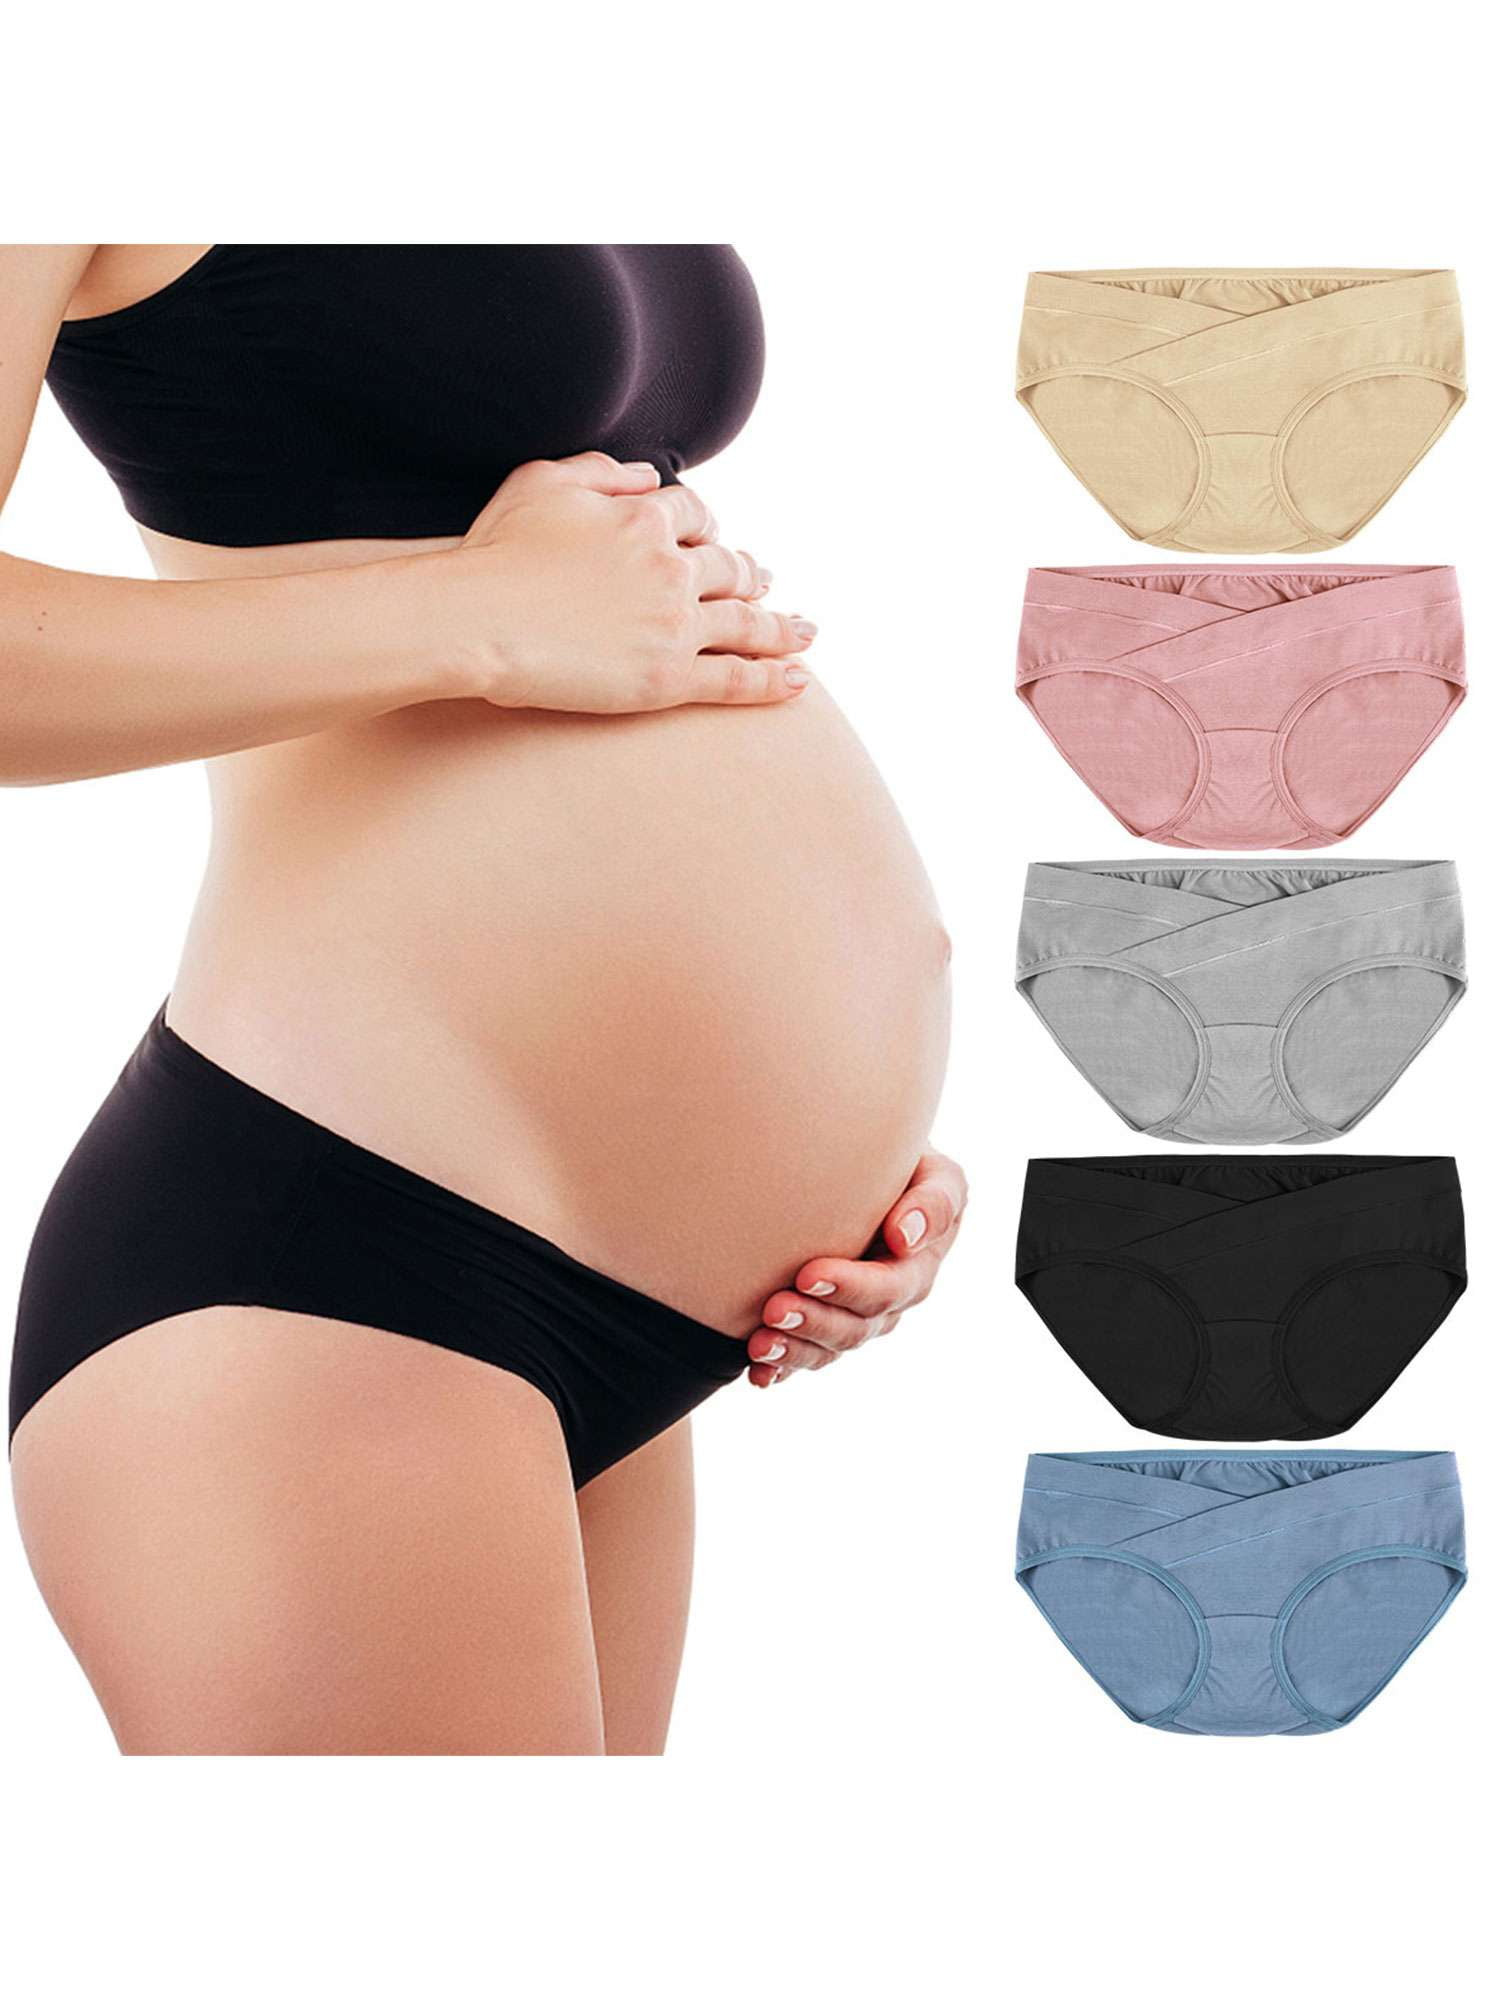 Spdoo Cotton Maternity Panties High Waist Panties for Pregnant Daisy  Underwear Pregnancy Briefs V-shaped Belly Support Maternity Briefs